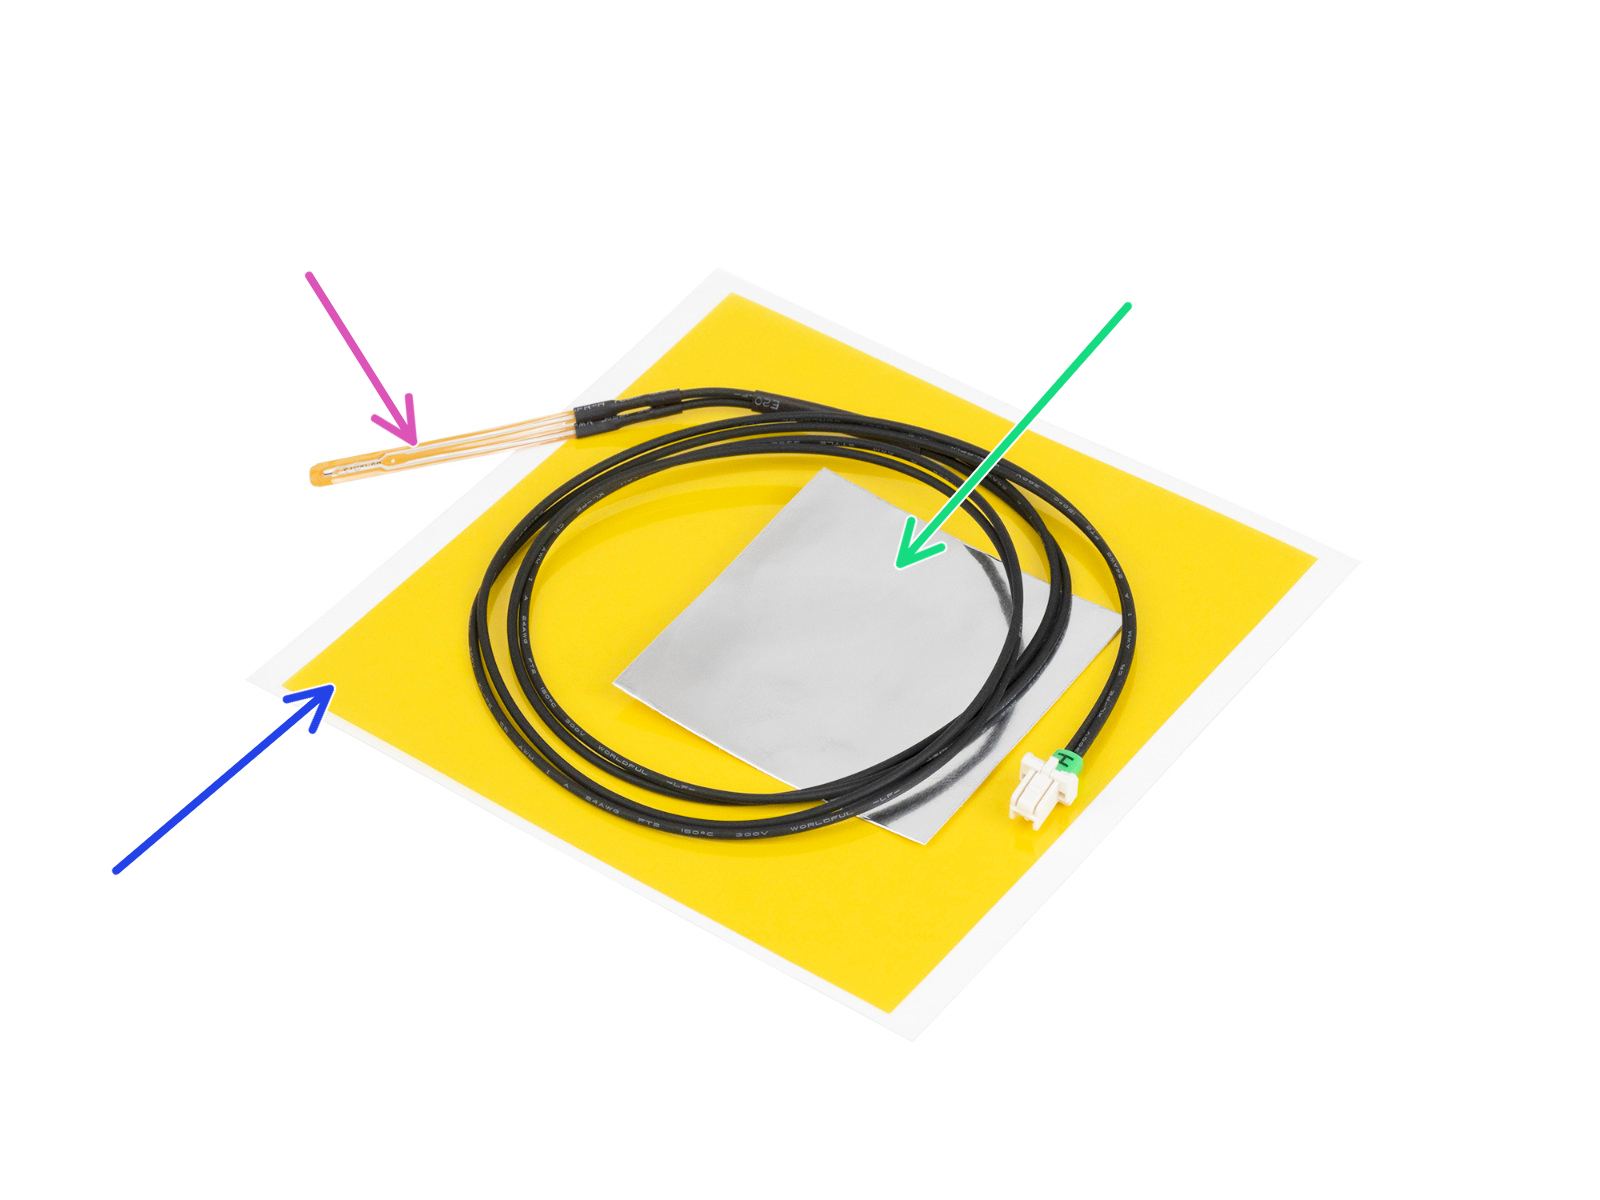 New heatbed thermistor: parts preparation